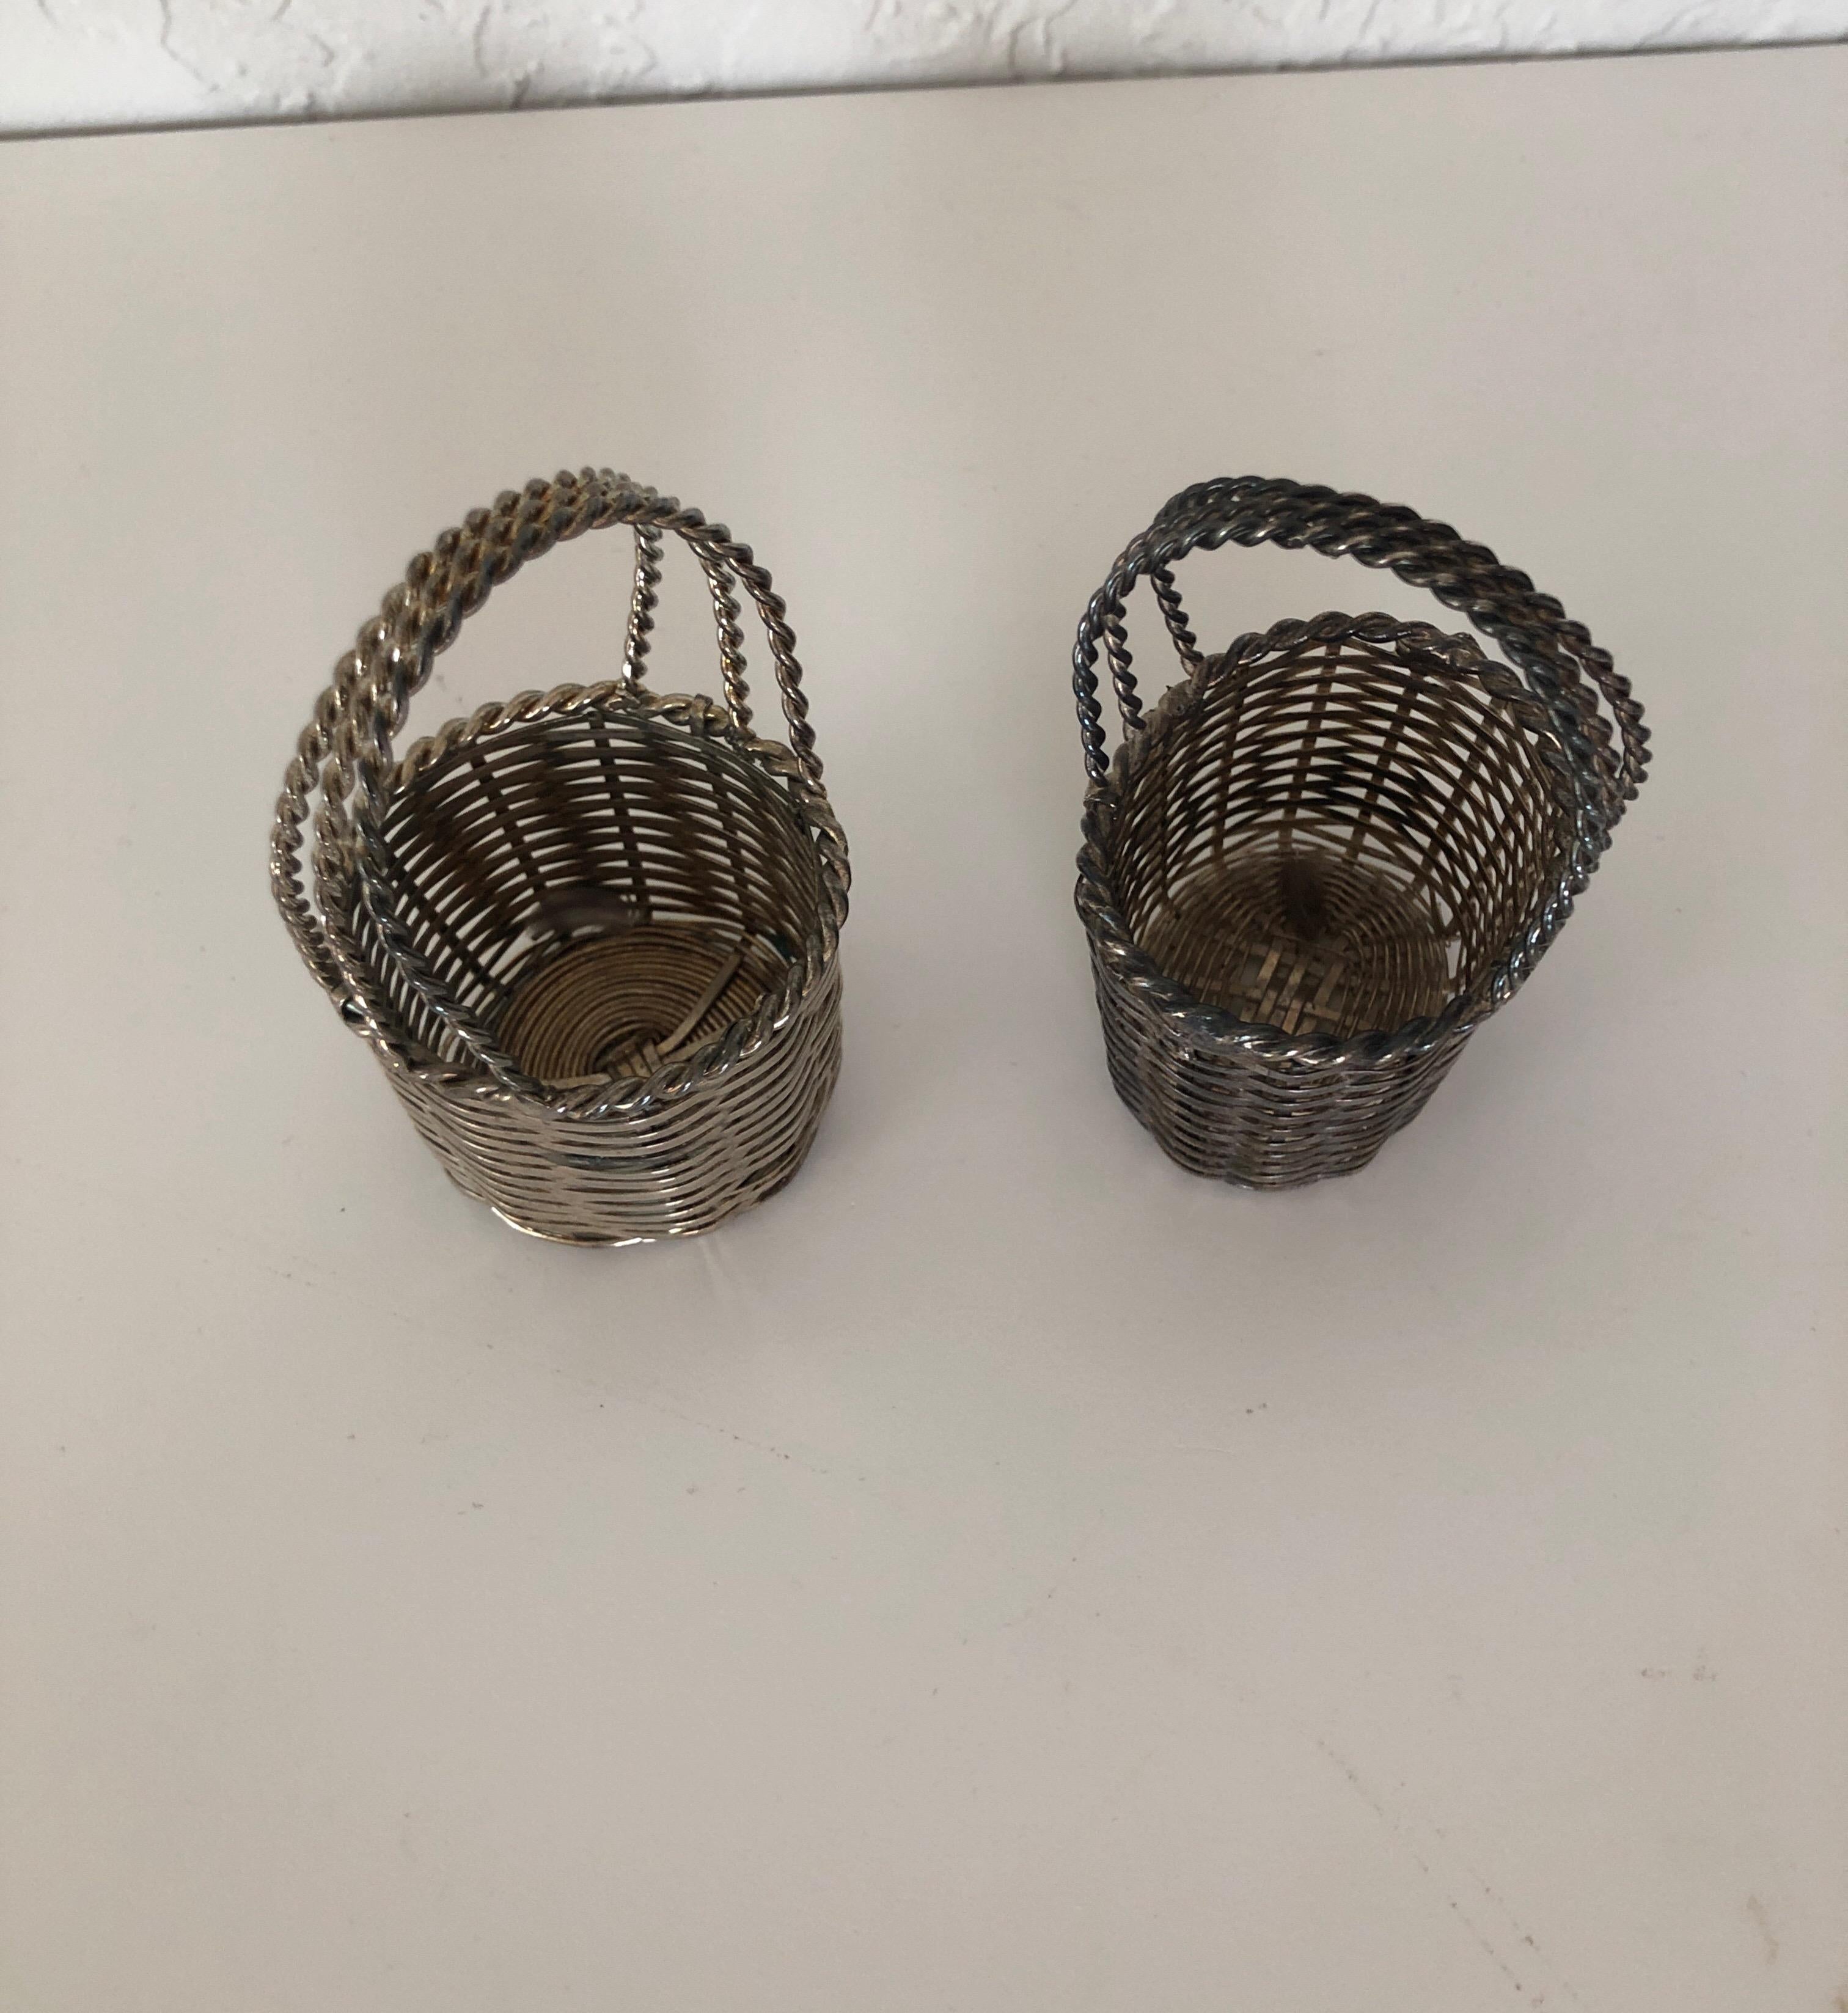 Bohemian Pair of Silver Wire Miniature Decorative Baskets